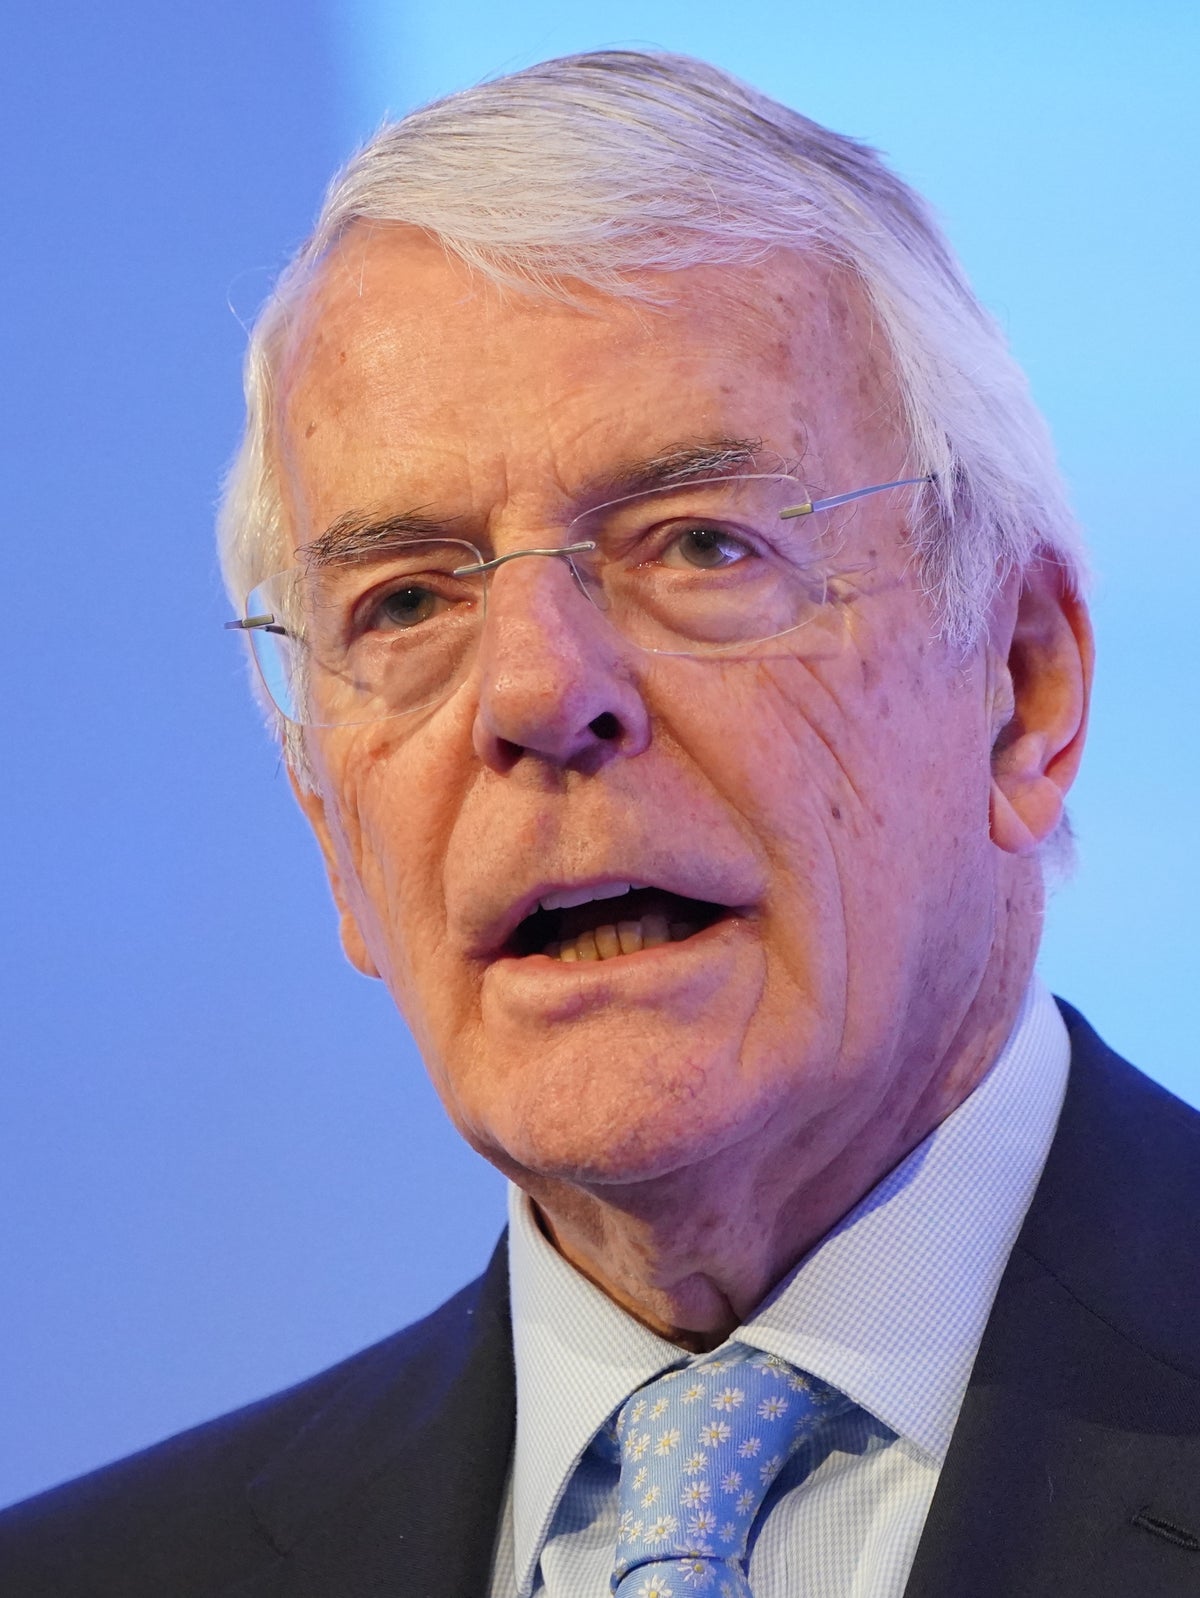 John Major urges Jeremy Hunt to prioritize defense spending over tax cuts in budget